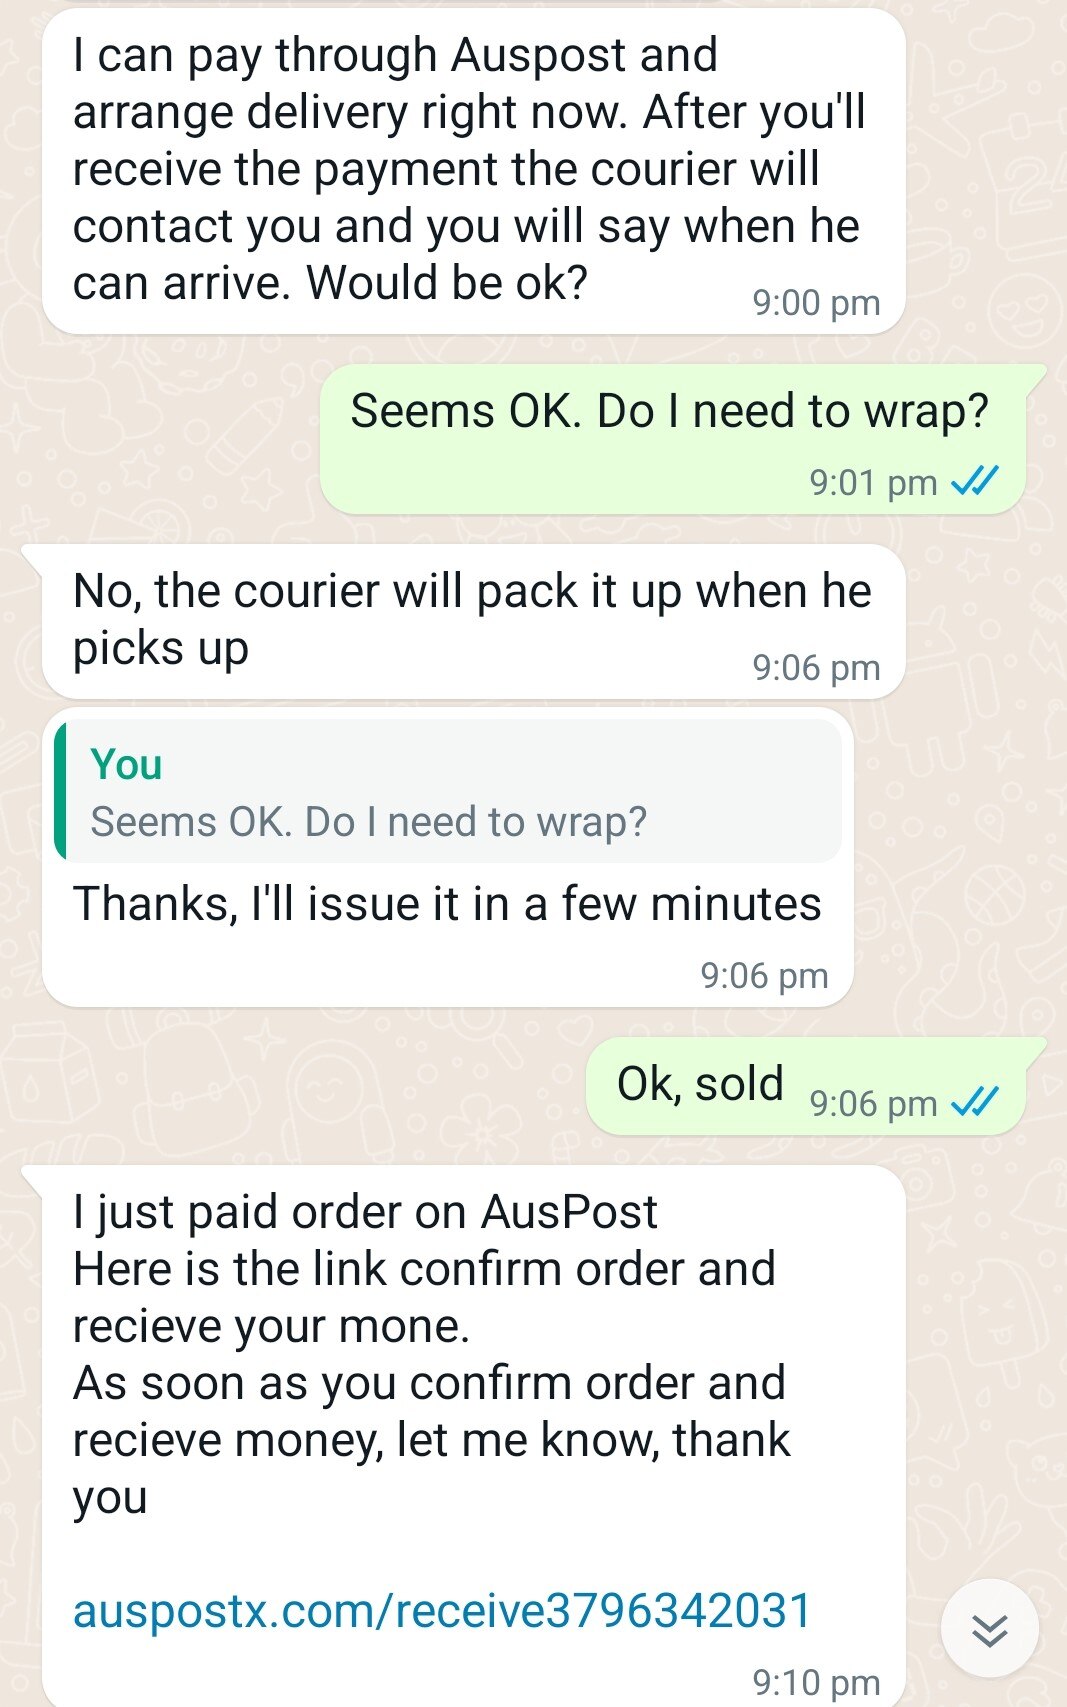 Linda screenshot messages received from a scammer, which included a link to an 'Australia Post' website.